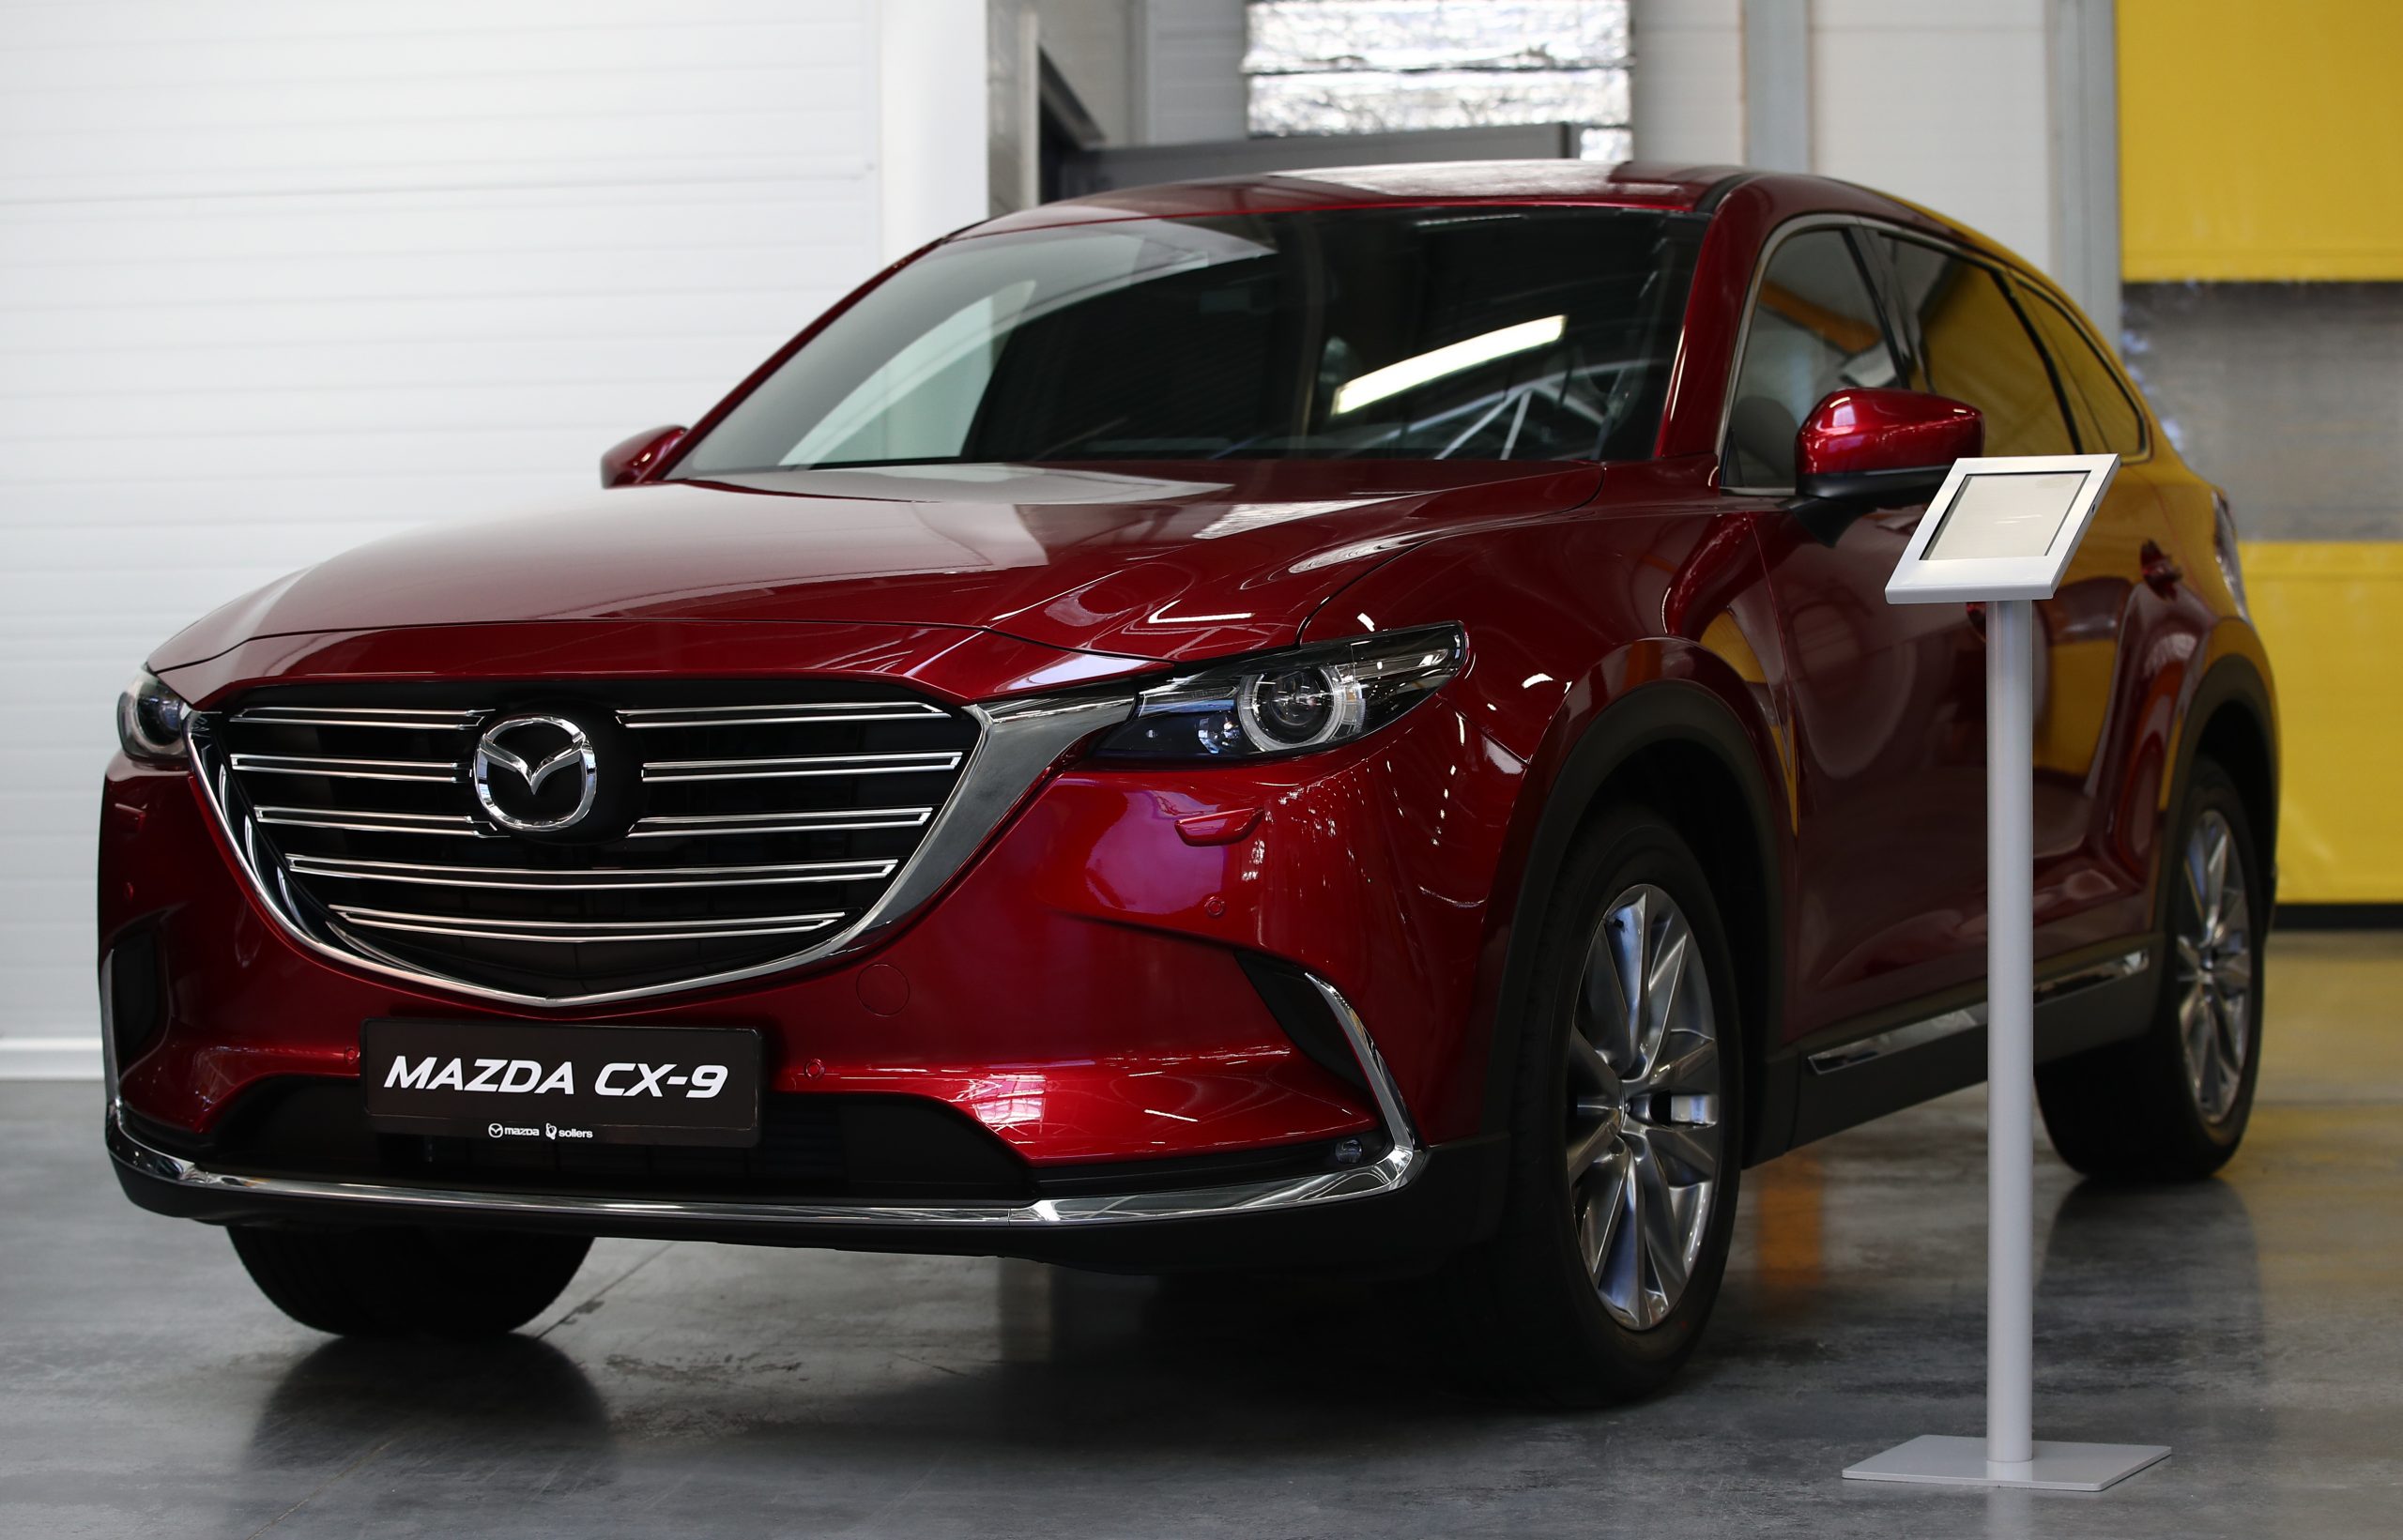 VLADIVOSTOK, RUSSIA - SEPTEMBER 10, 2018: A Mazda CX-9 car on display at a Mazda Sollers Manufacturing Rus car factory during a visit by the president of Russia and the prime minister of Japan on the eve of the 4th Eastern Economic Forim; Mazda Sollers Manufacturing Rus is a joint venture by Russian automotive group Sollers and Japan's Mazda Motor Corportation. Valery Sharifulin/TASS Host Photo Agency (Photo by Valery SharifulinTASS via Getty Images)